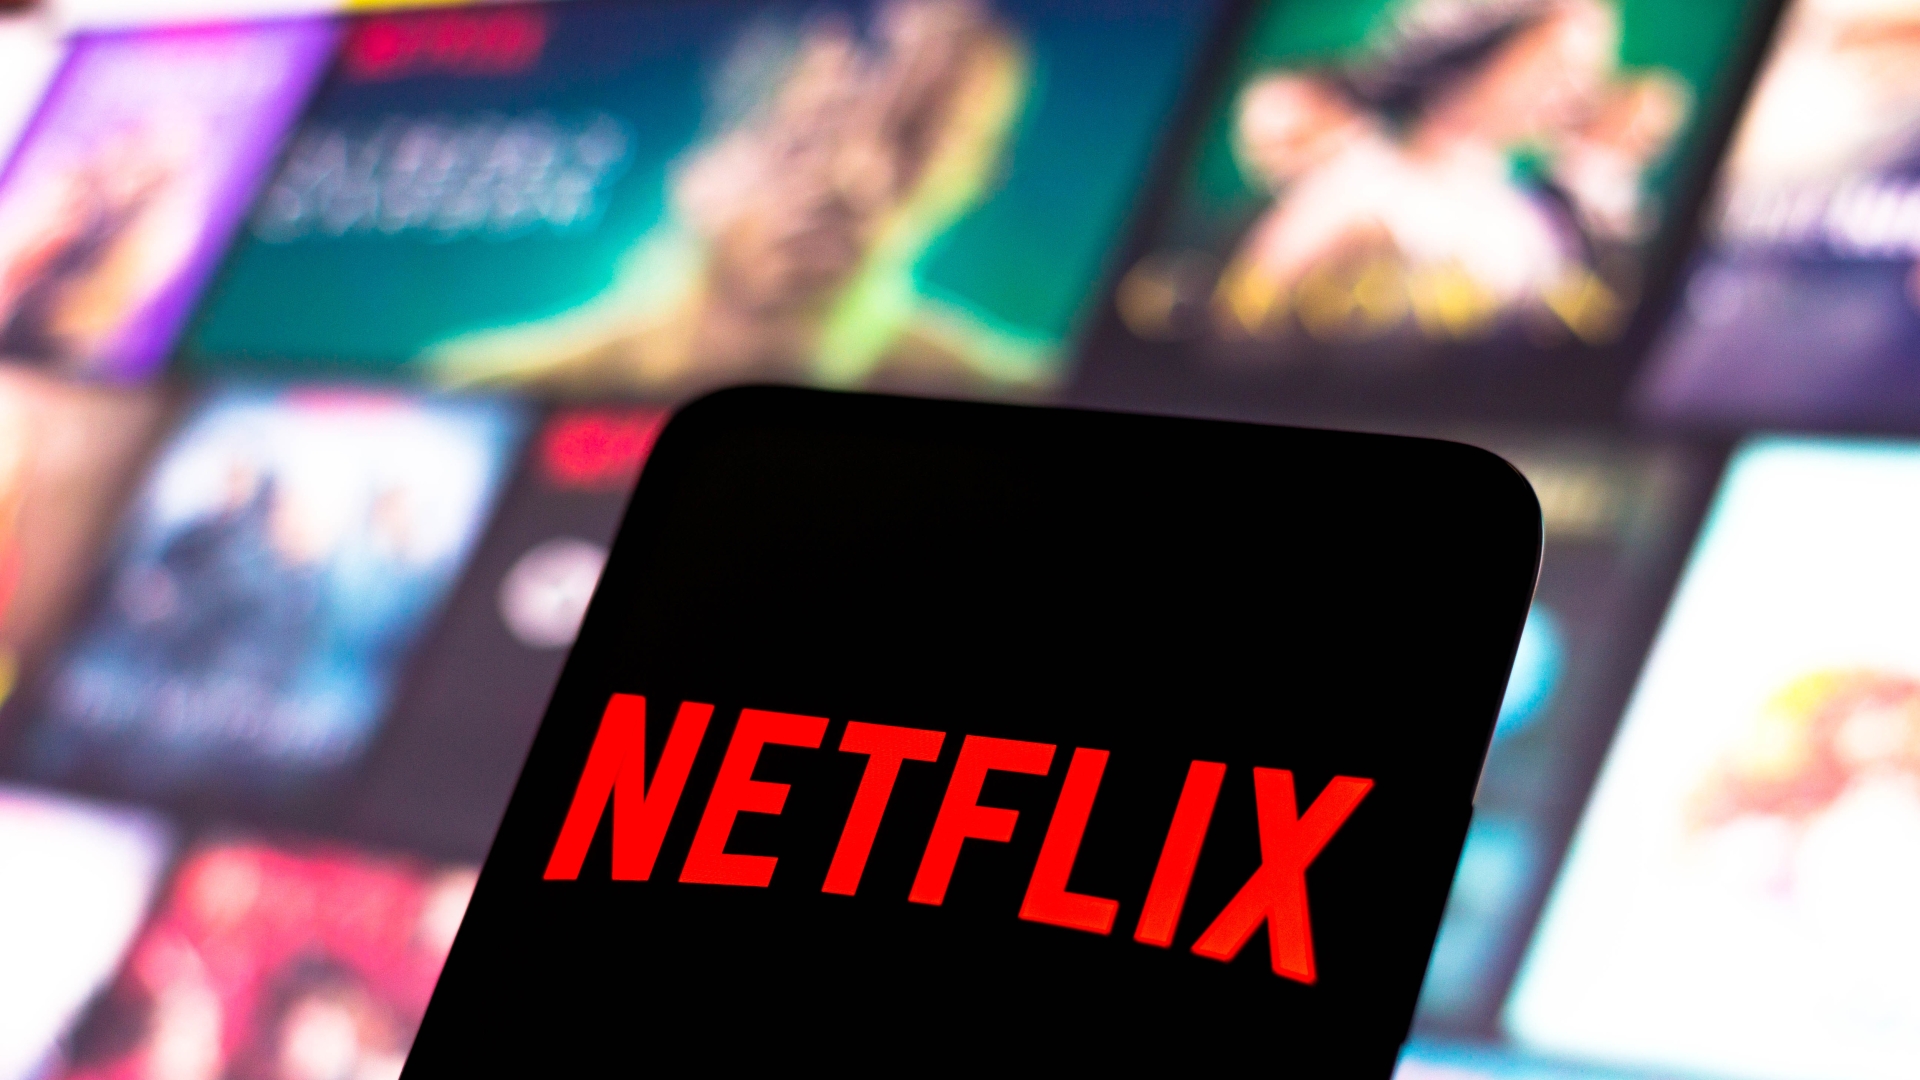 Furious Netflix users rage at plans for ads and shared login ban